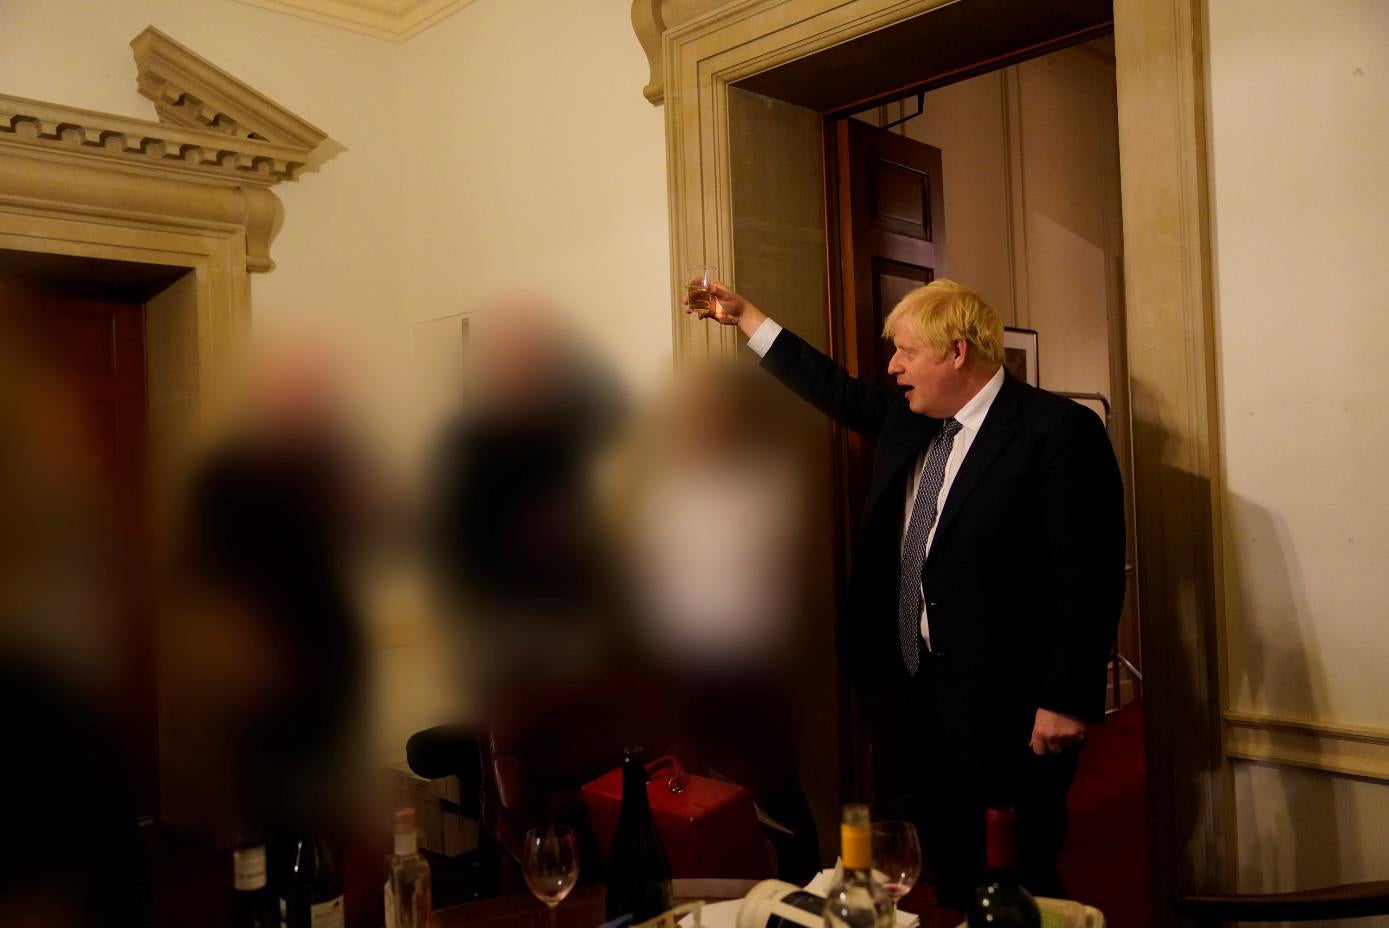 Prime Minister Boris Johnson at a gathering in 10 Downing Street in November 2020 (Sue Gray Report/Cabinet Office/PA)